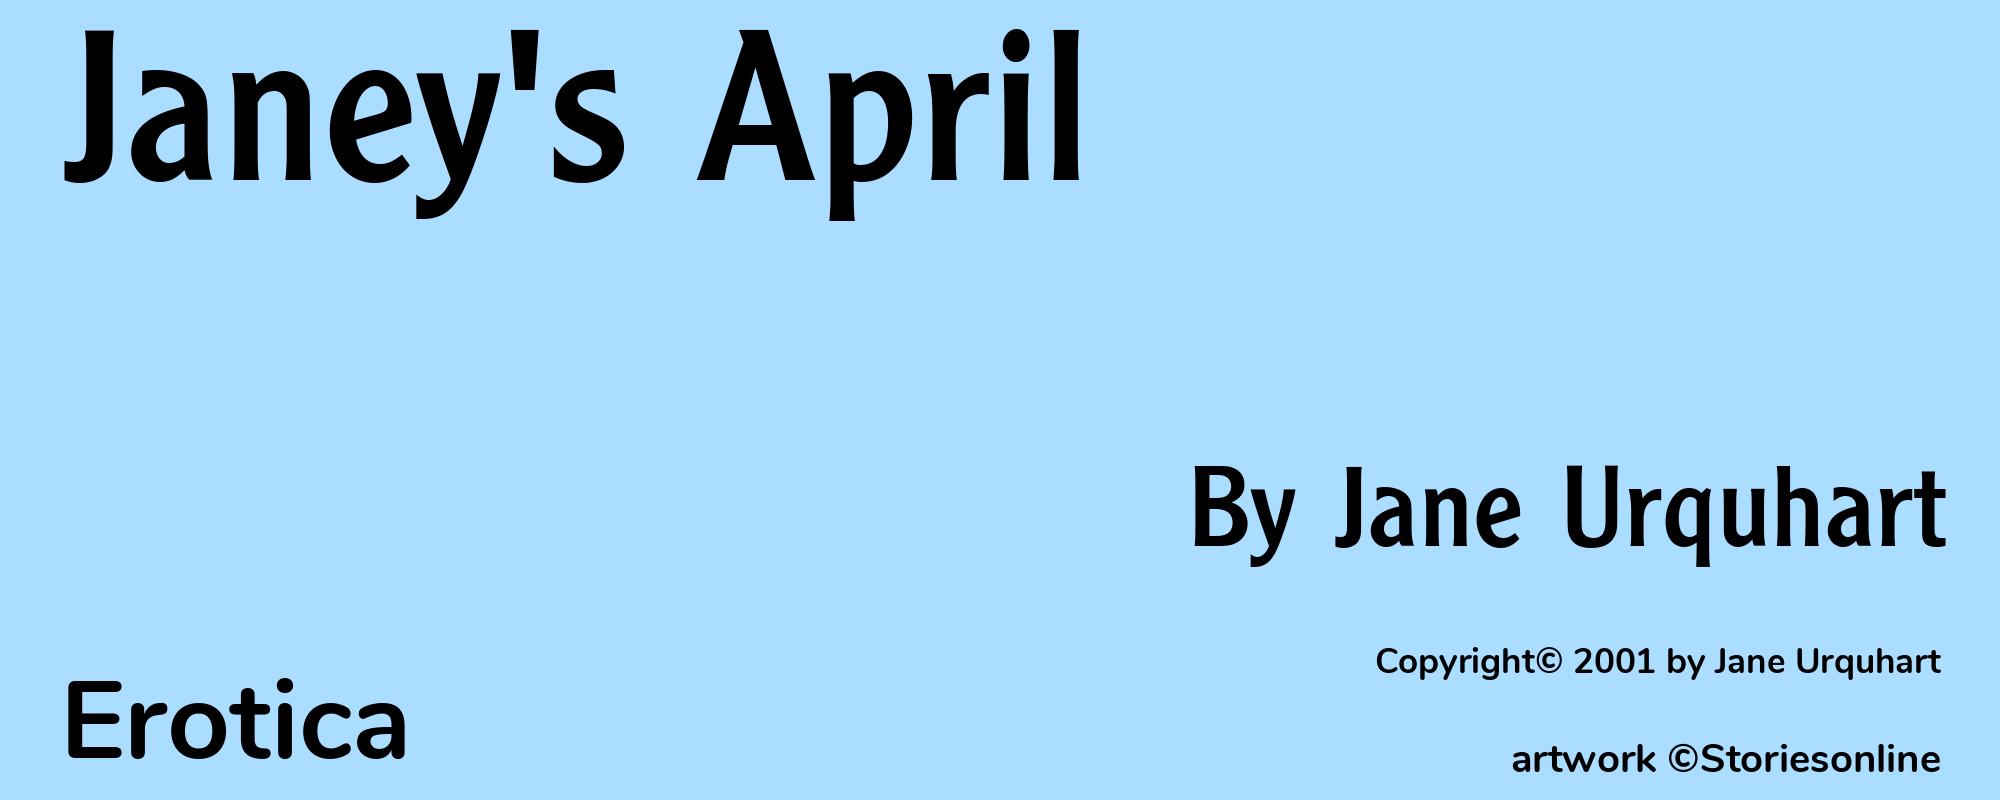 Janey's April - Cover